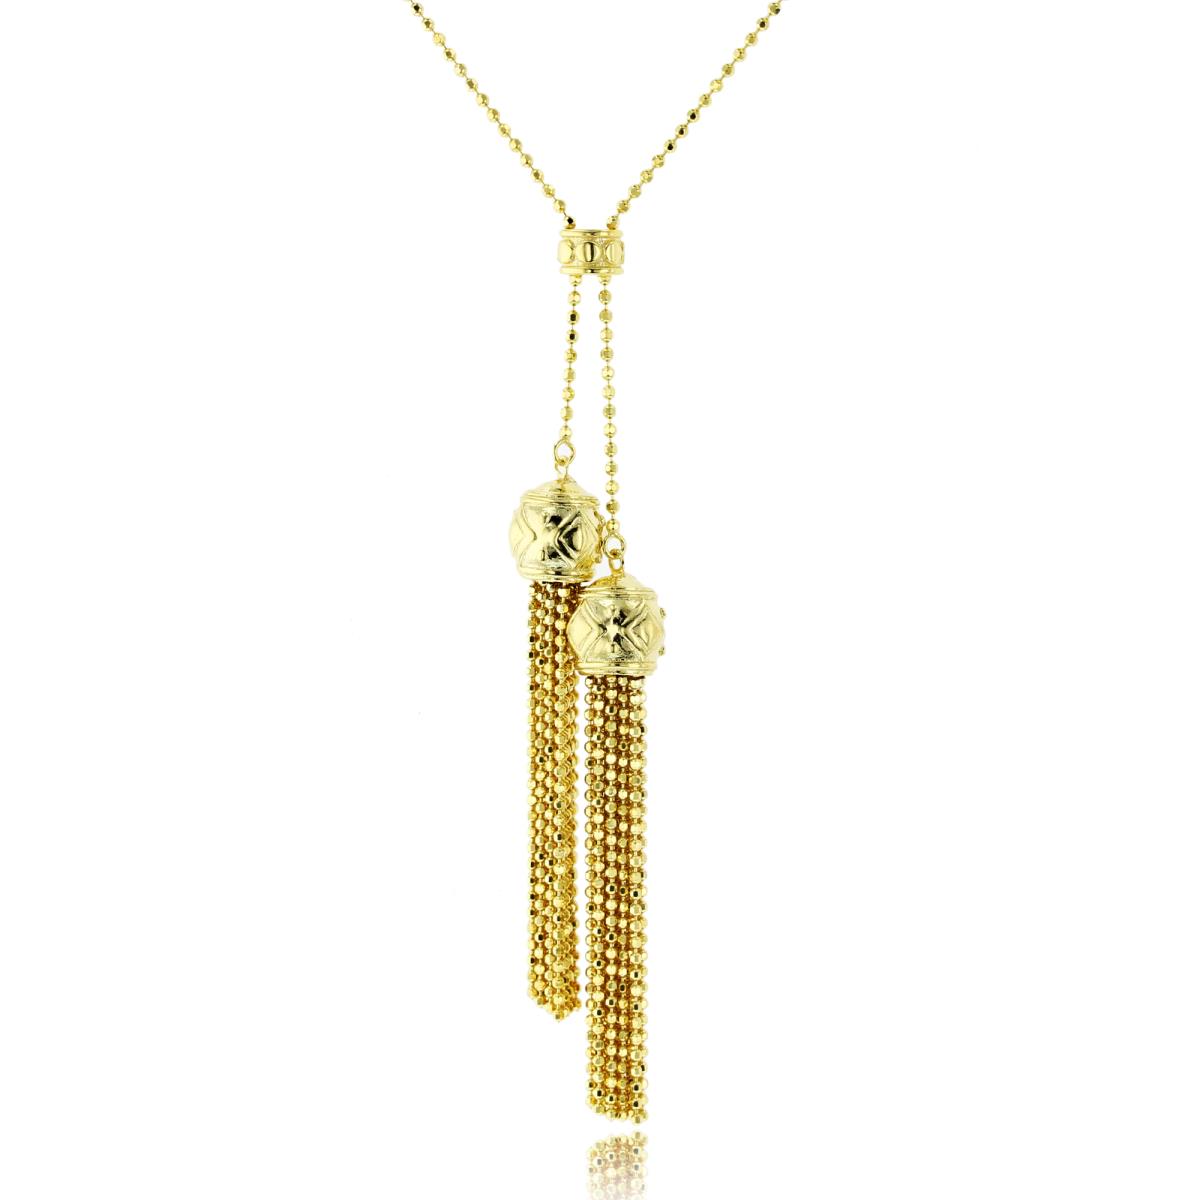 10K Yellow Gold Double Tassels 18" Beaded Necklace